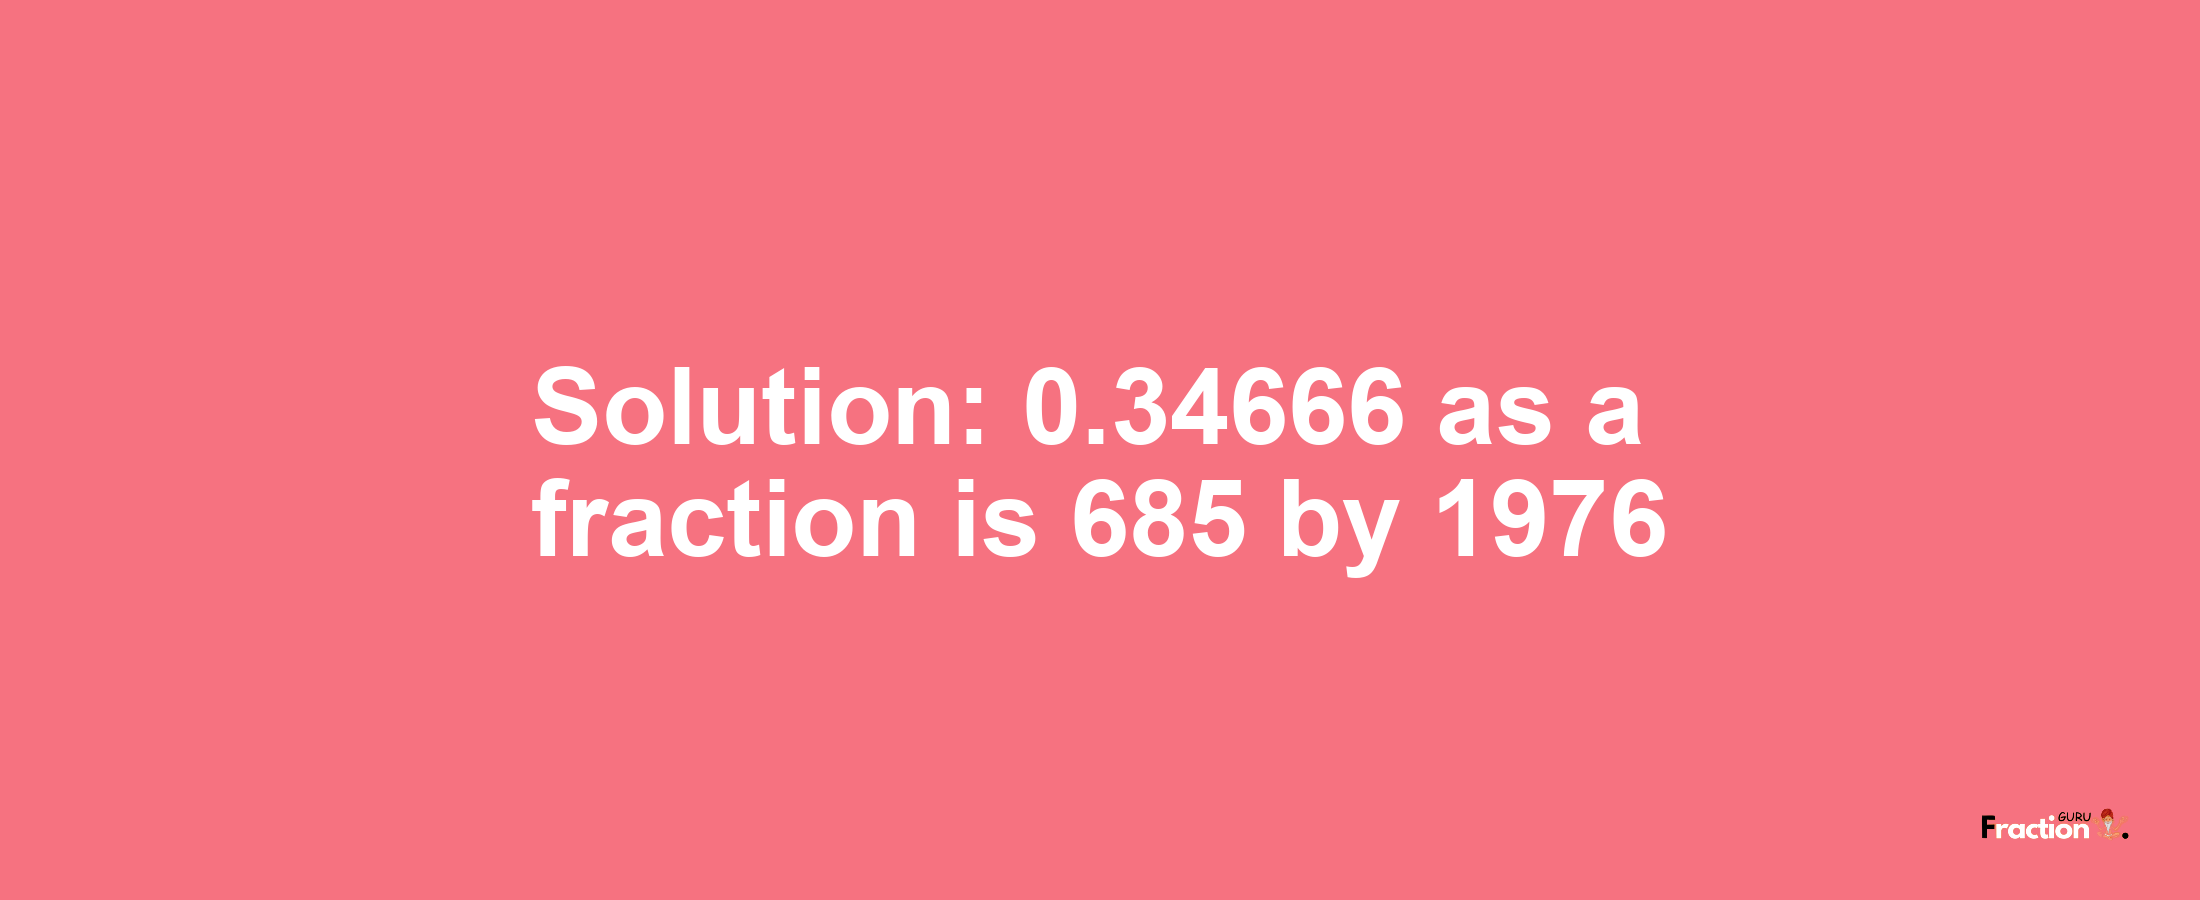 Solution:0.34666 as a fraction is 685/1976